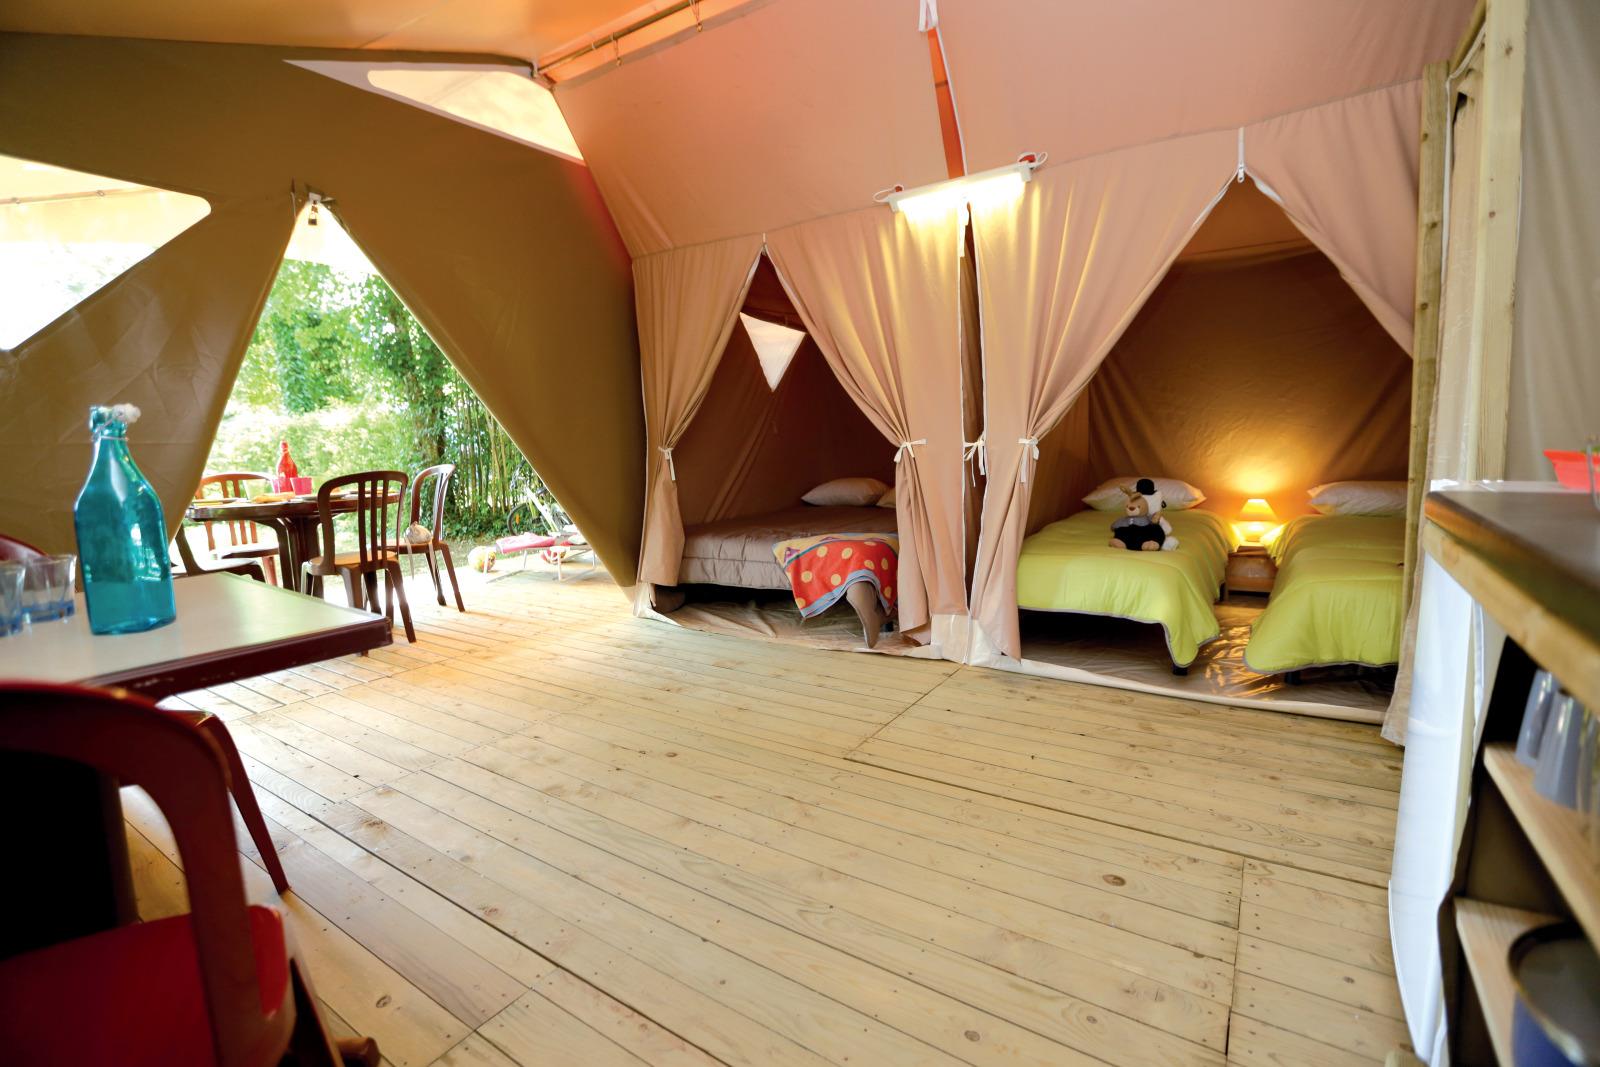 Accommodation - Tent Canada 2 Bedrooms Without Toilet Block 30M² -  2 Bedrooms - Capfun - Camping Beau Rivage***